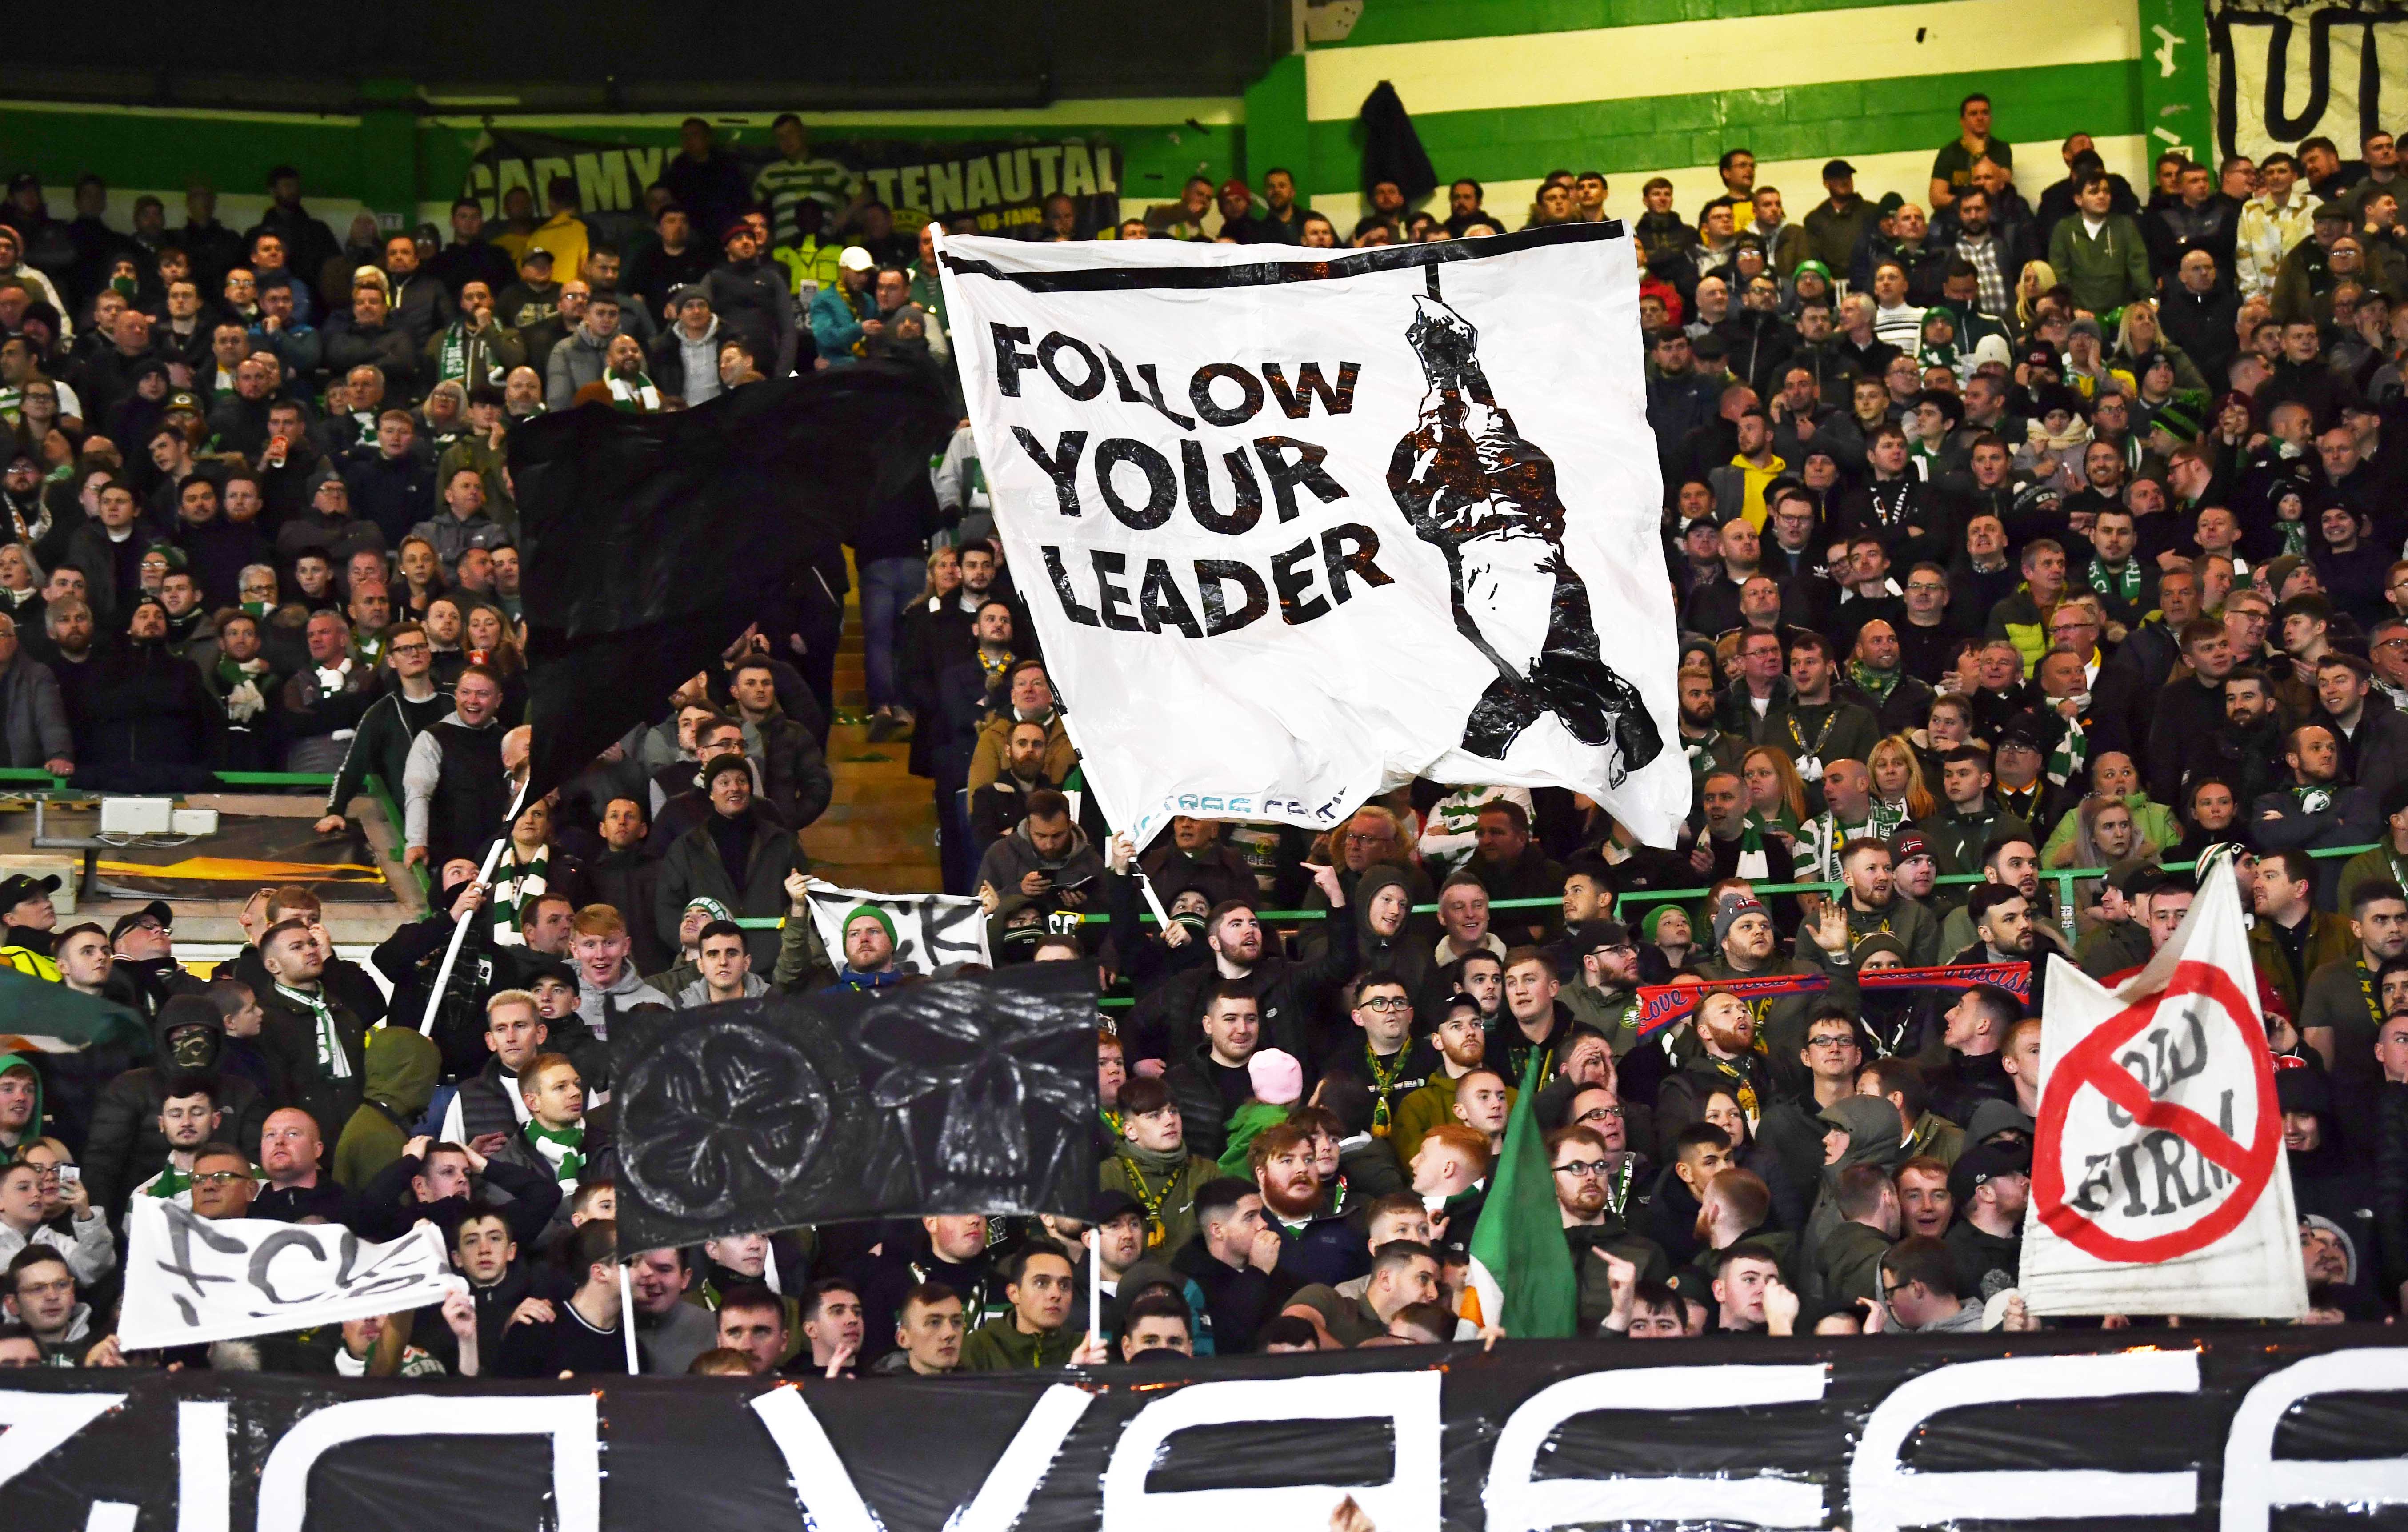 A banner depicting hanged Italian dictator Benito Mussolini is displayed by home supporters during Thursday’s Europa League match at Celtic Park